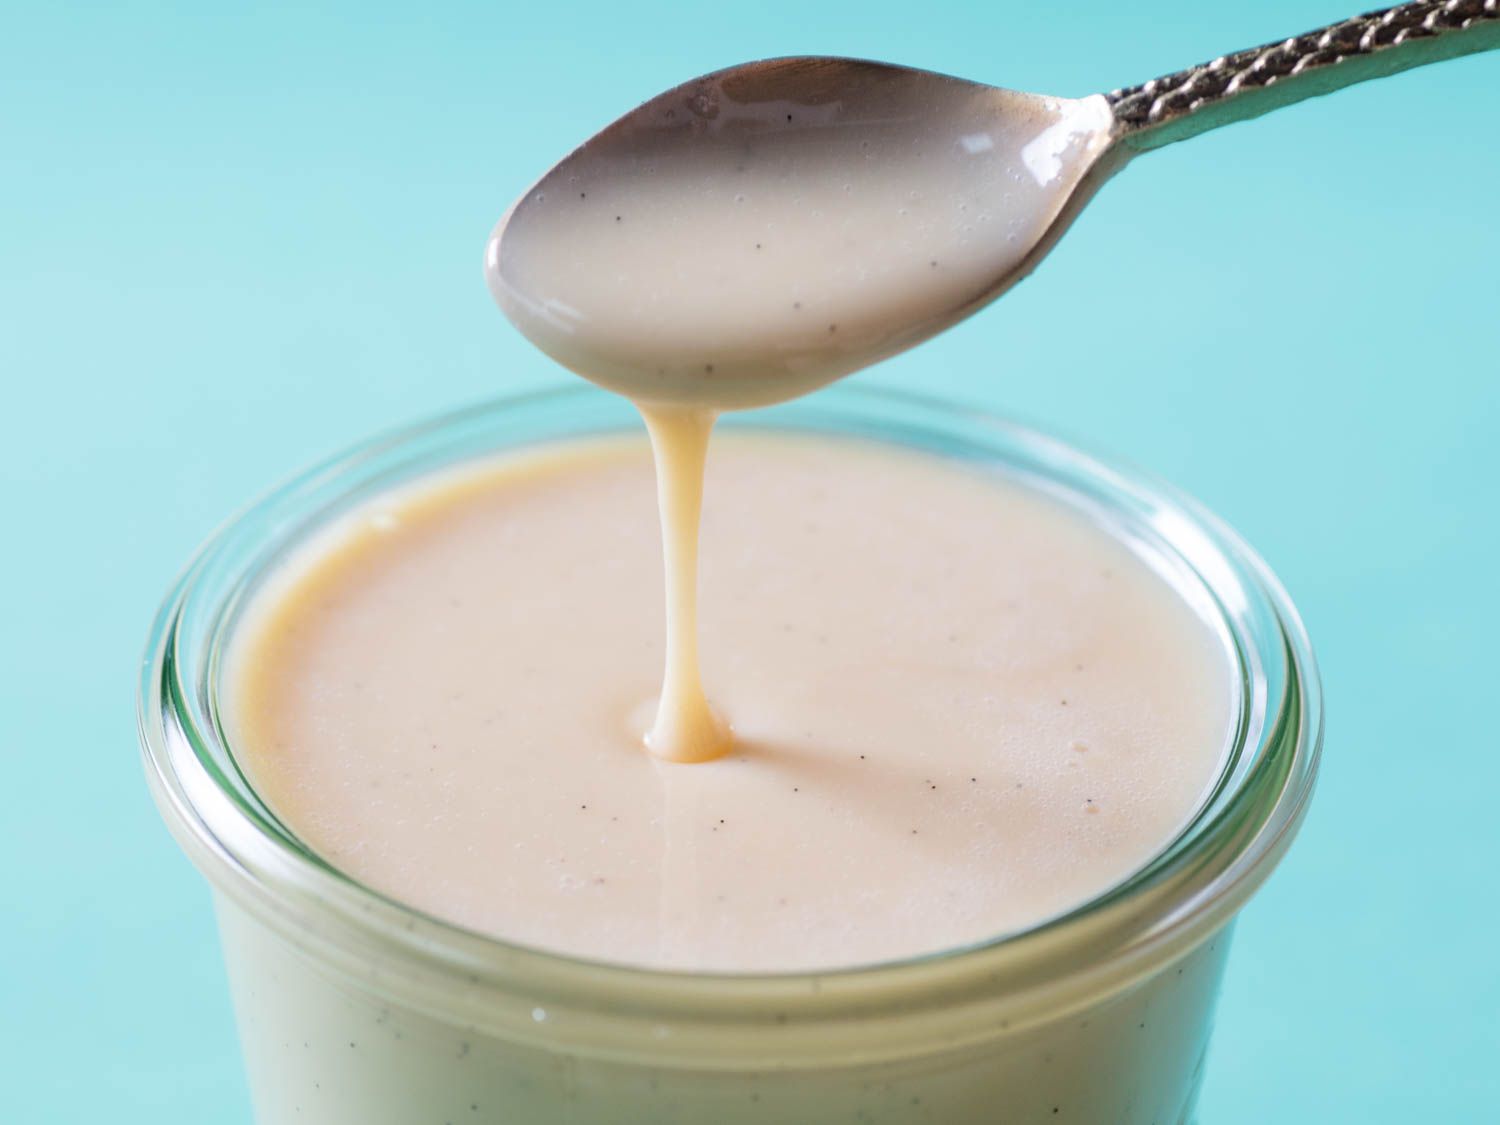 A spoon lifting out of a glass jar filled with homemade sweetened condensed milk.